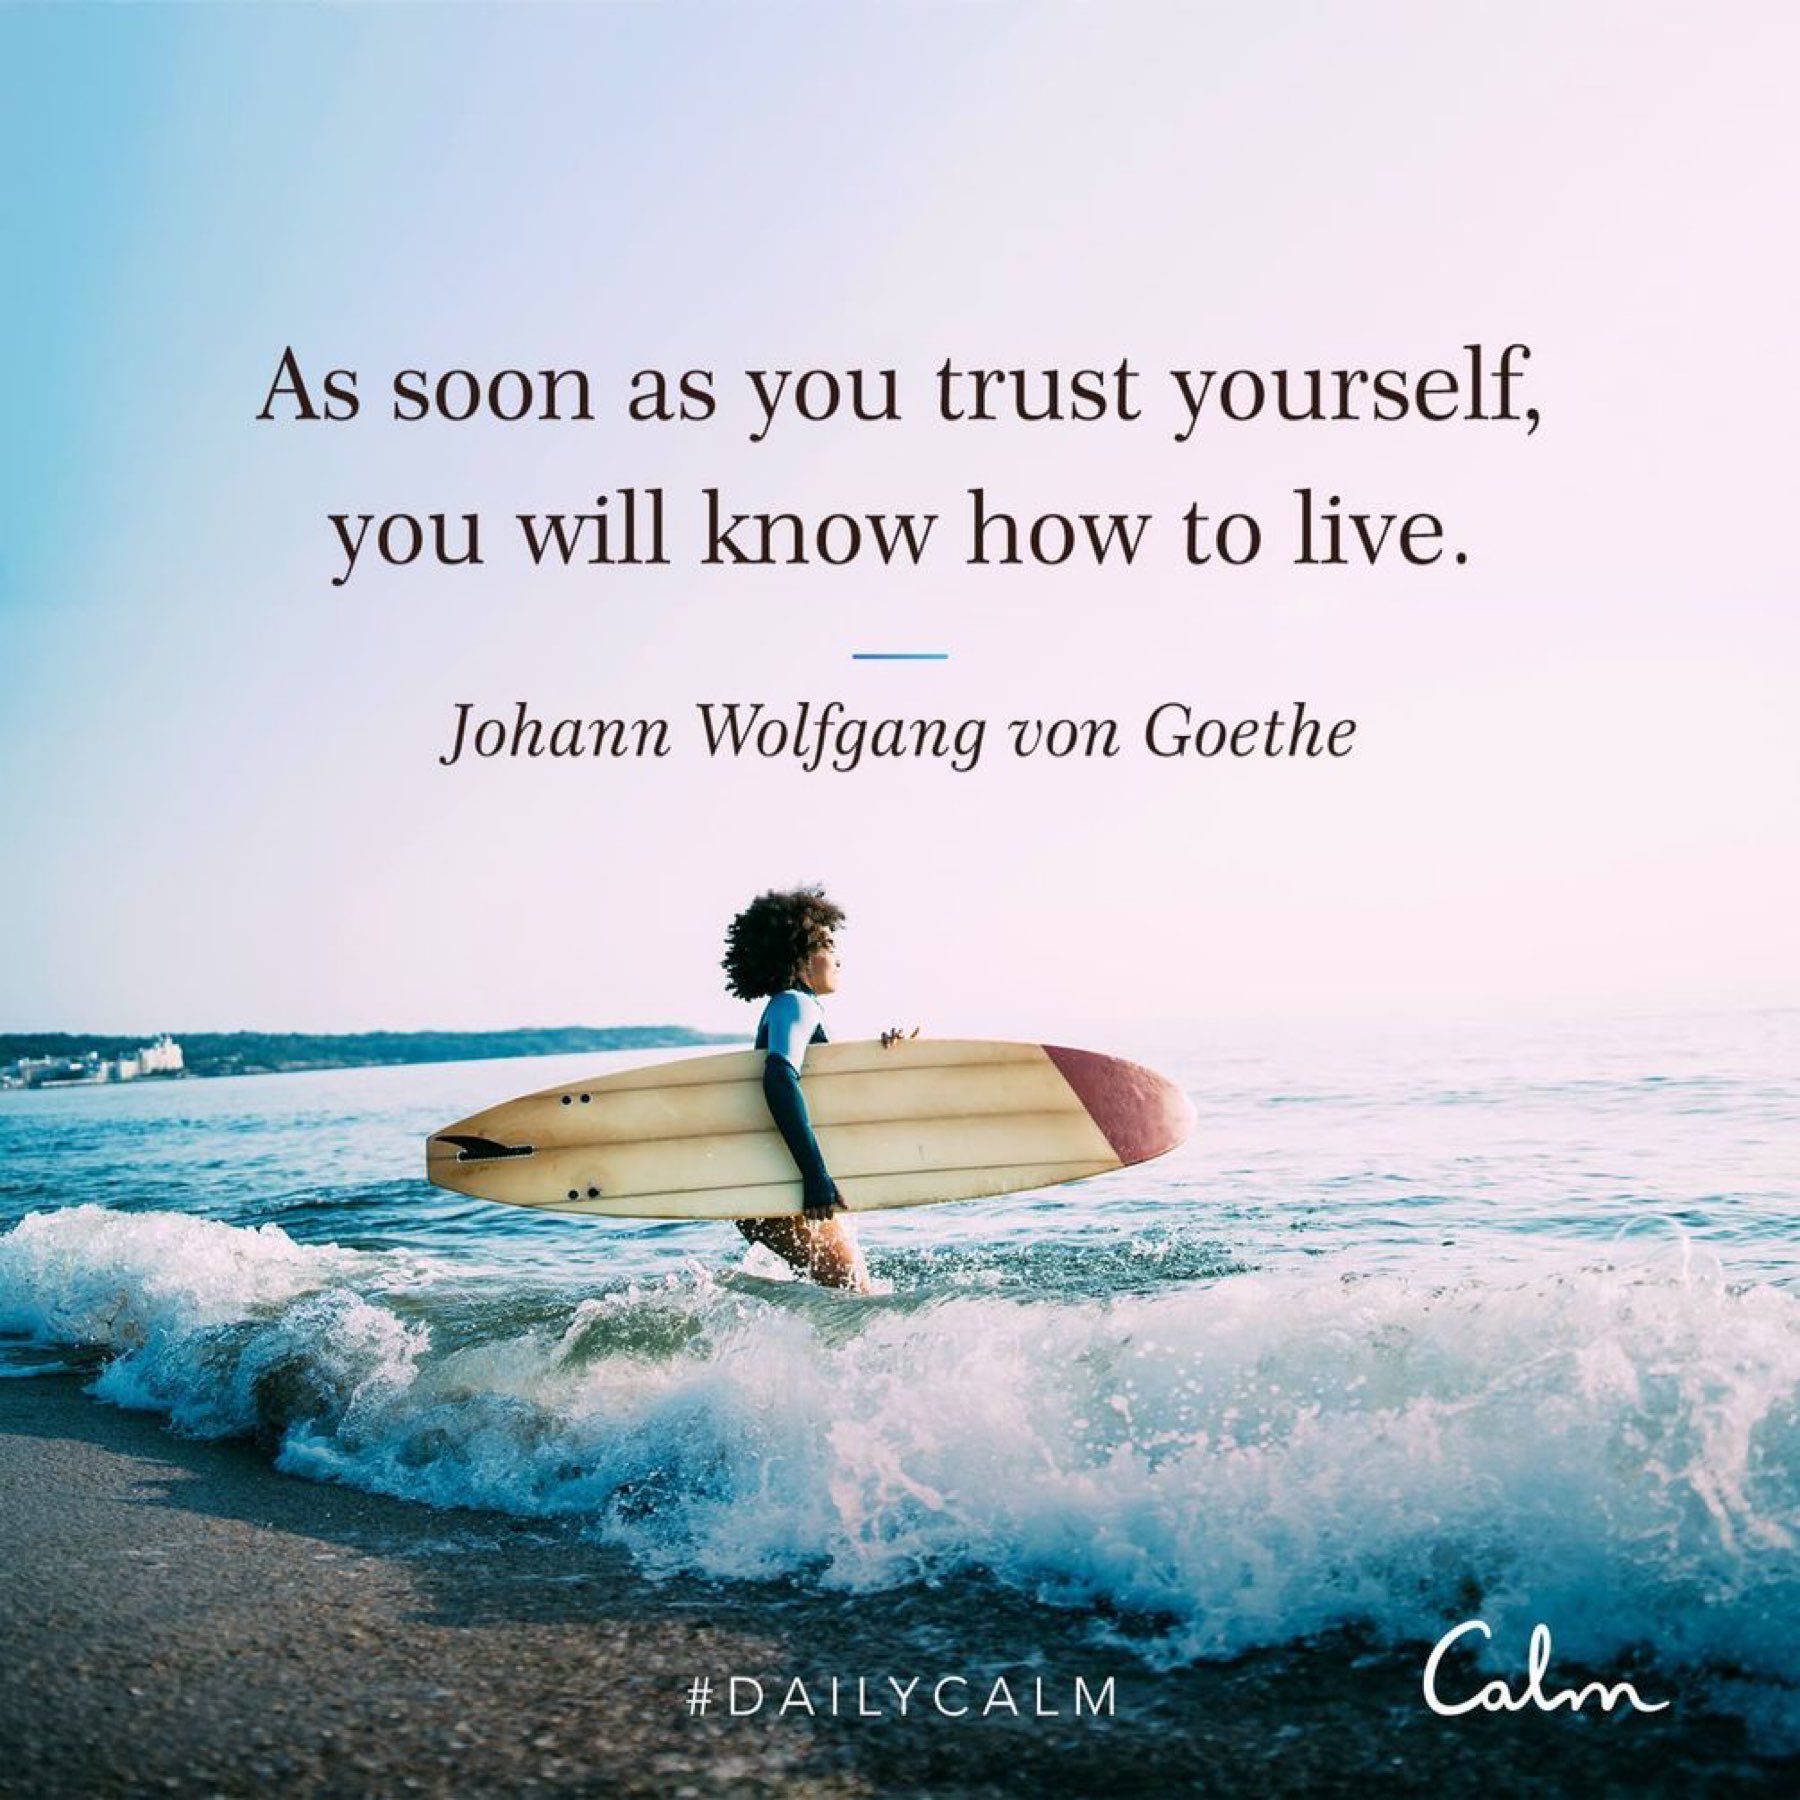 When you trust yourself you will know how to live